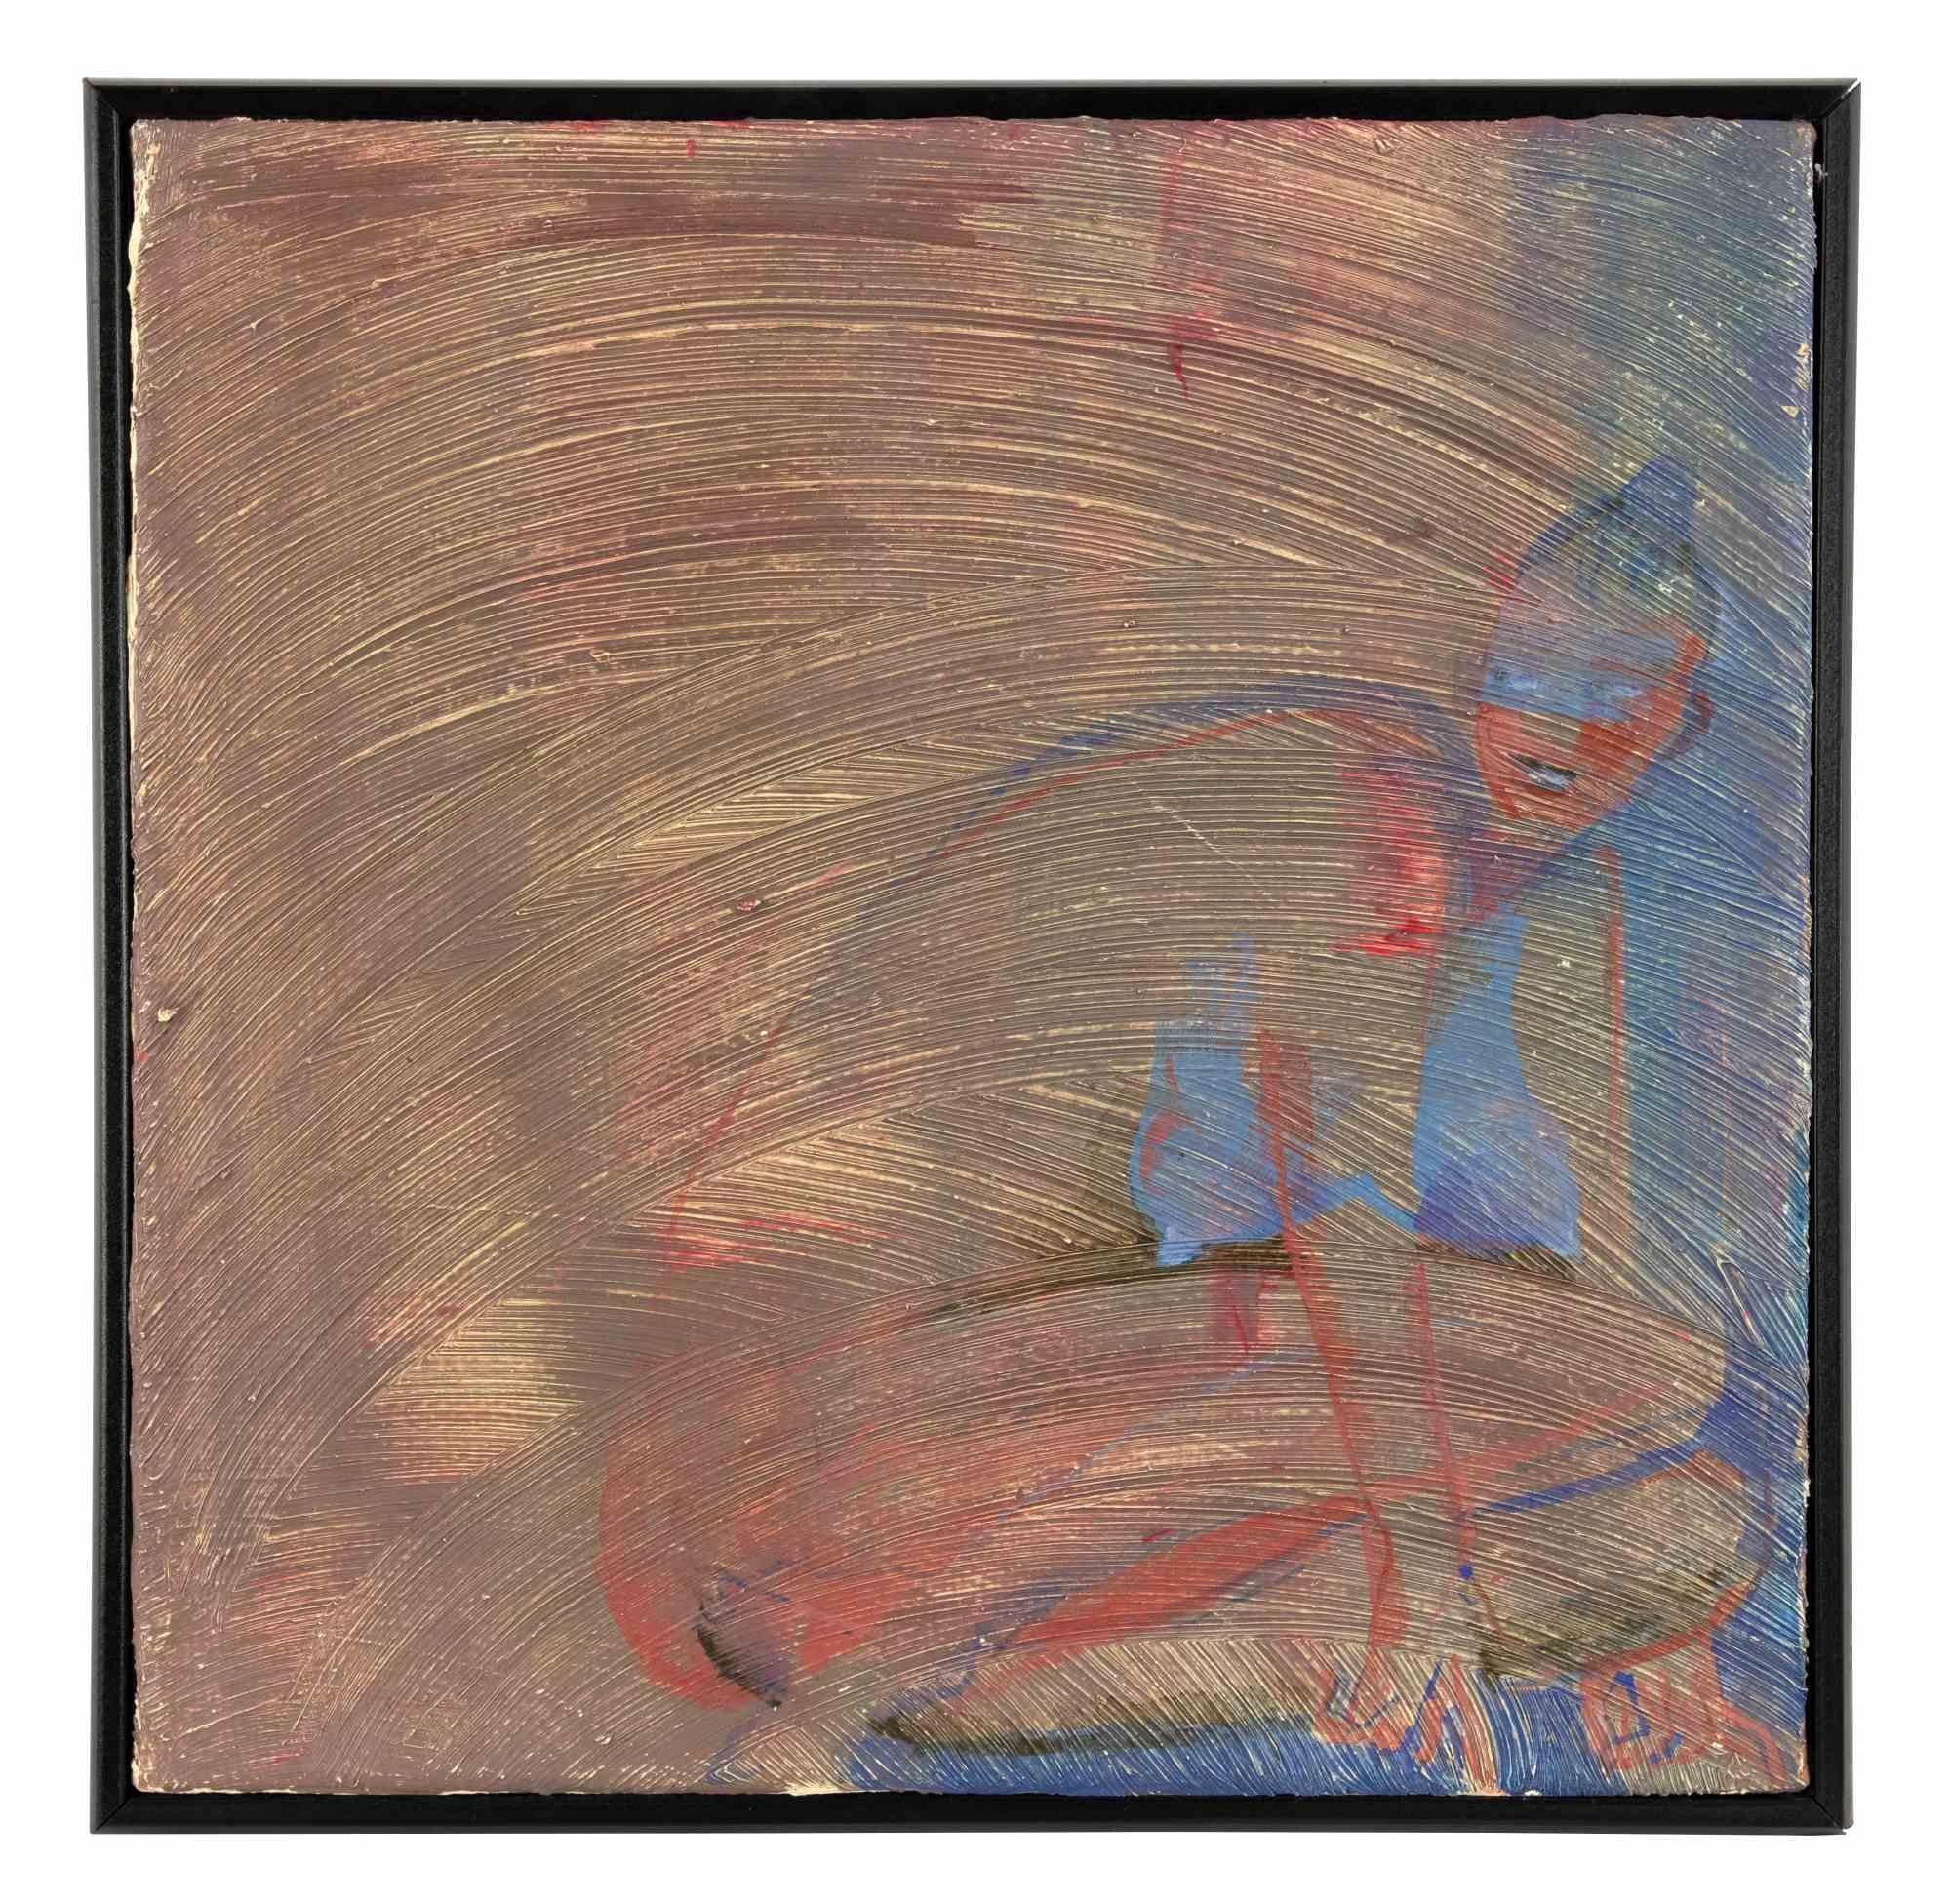 Untitled  is a mixed-media original painting (natural pigments and oil on canvas) realized in 2018 by Anastasia Kurakina.

In good conditions.

Includes frame

This contemporary artwork represents a common theme in Kurakina's oeuvre: a kneeling